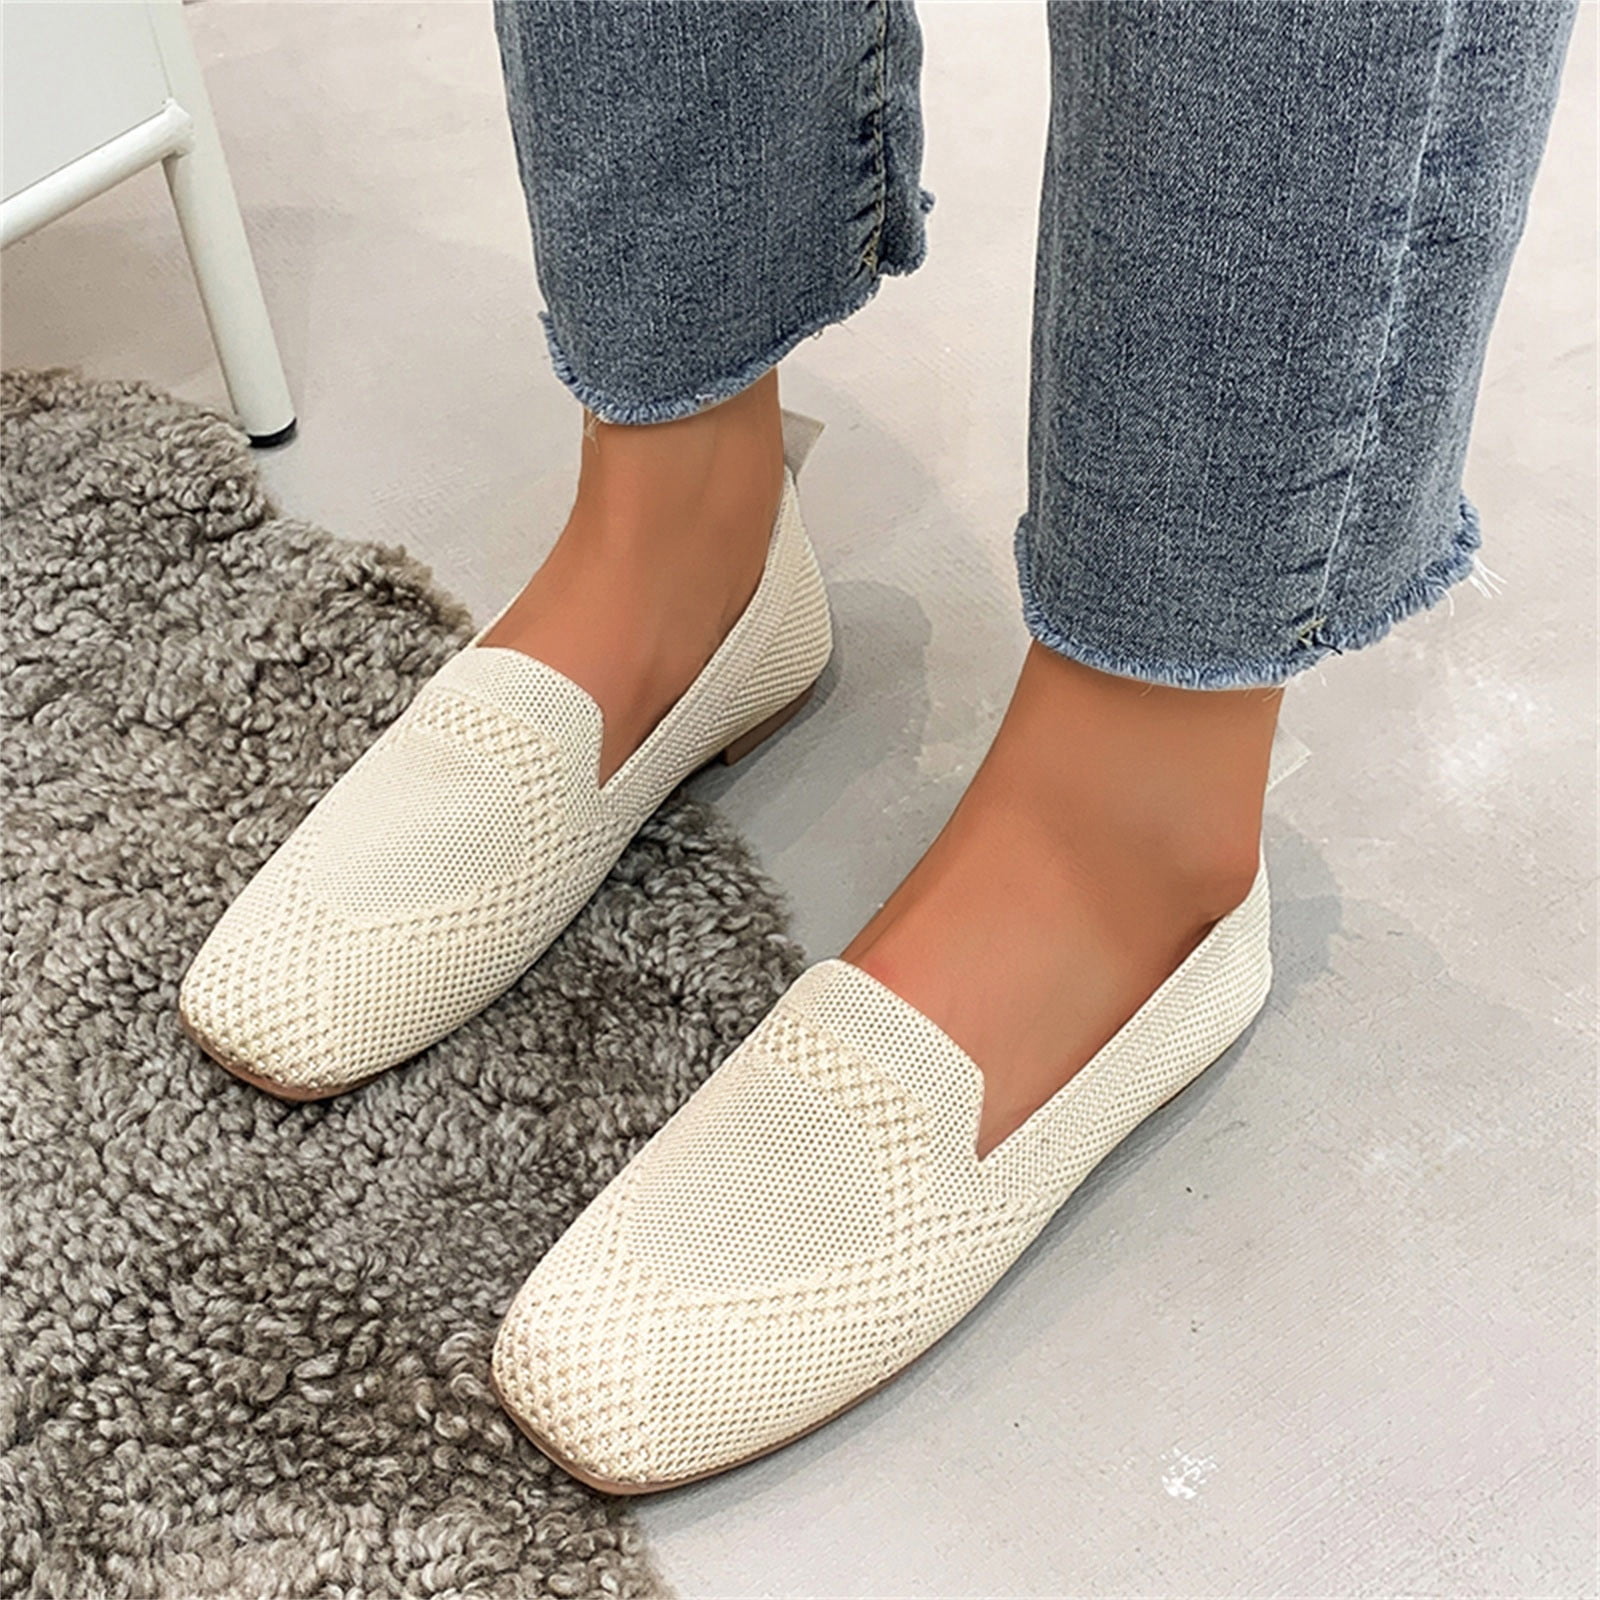 Cathalem Womens Casual Heels Shoes Ladies Fashion Square Toe Knit Hollow  Out Breathable Flat Soft Casual Slip on Shoes Women 8 Beige 7 